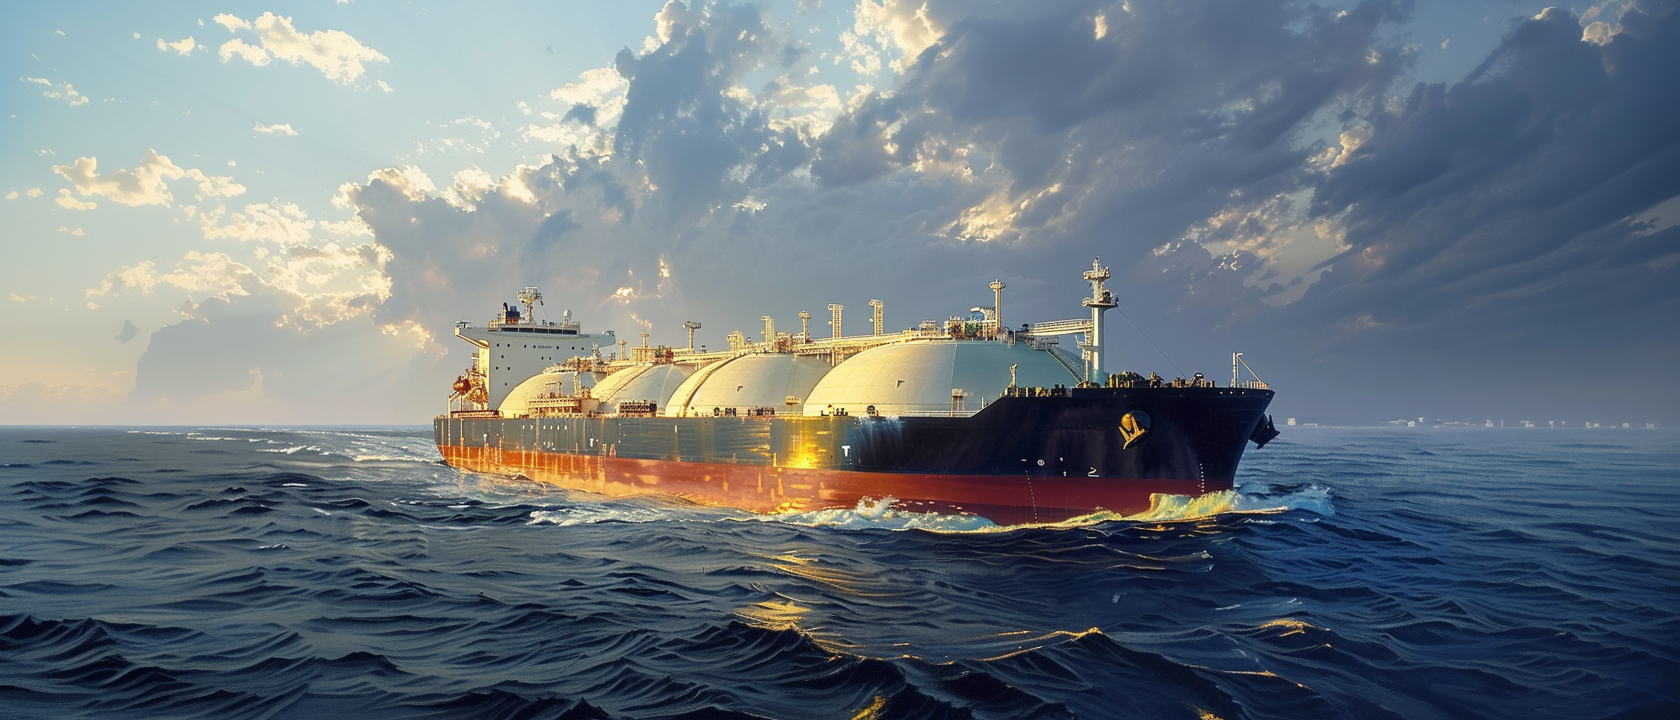 U.S. LNG Export Projects at Risk Due to Stricter Emission Standards